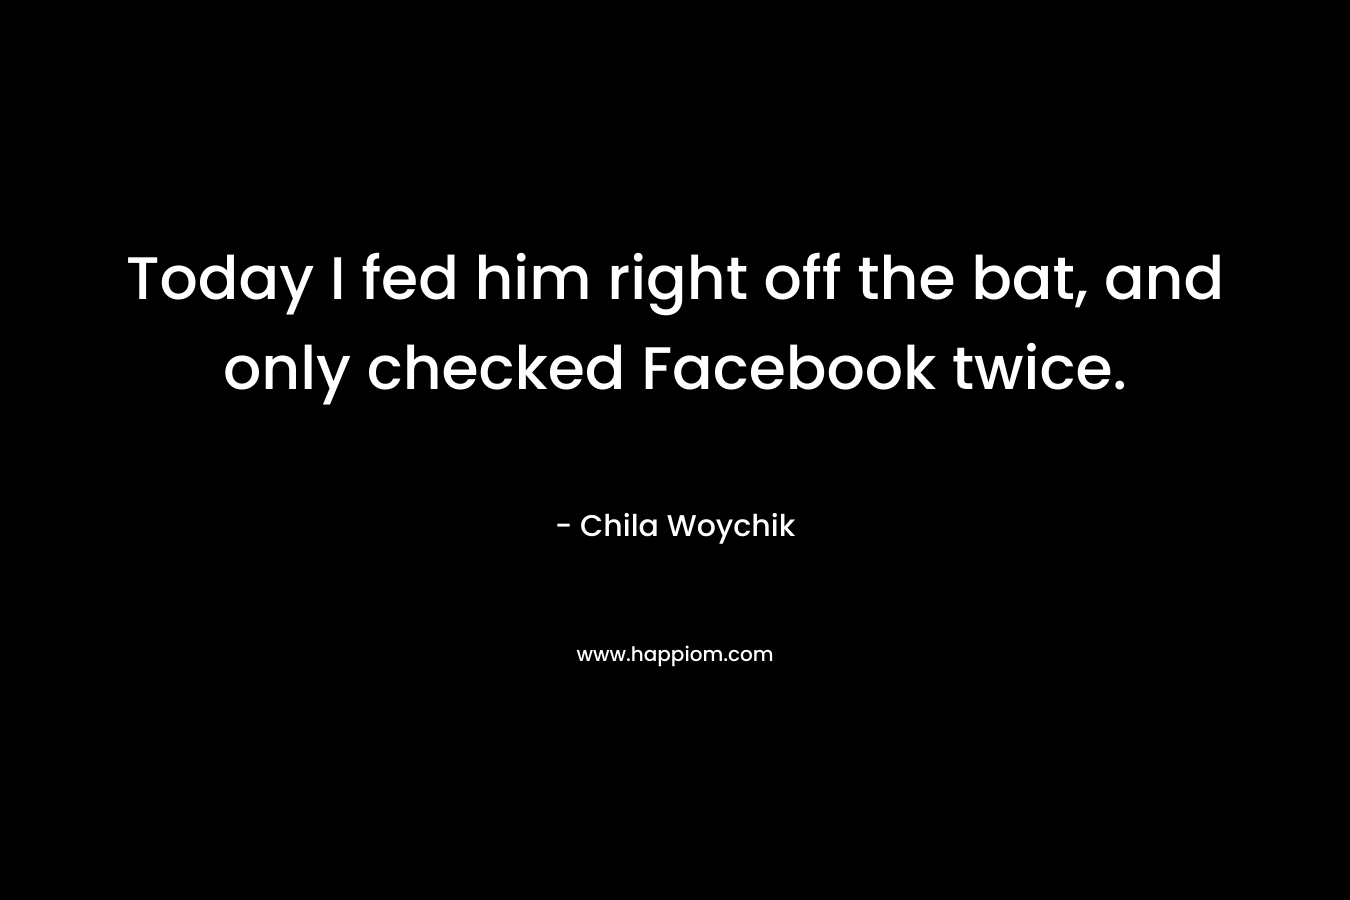 Today I fed him right off the bat, and only checked Facebook twice. – Chila Woychik